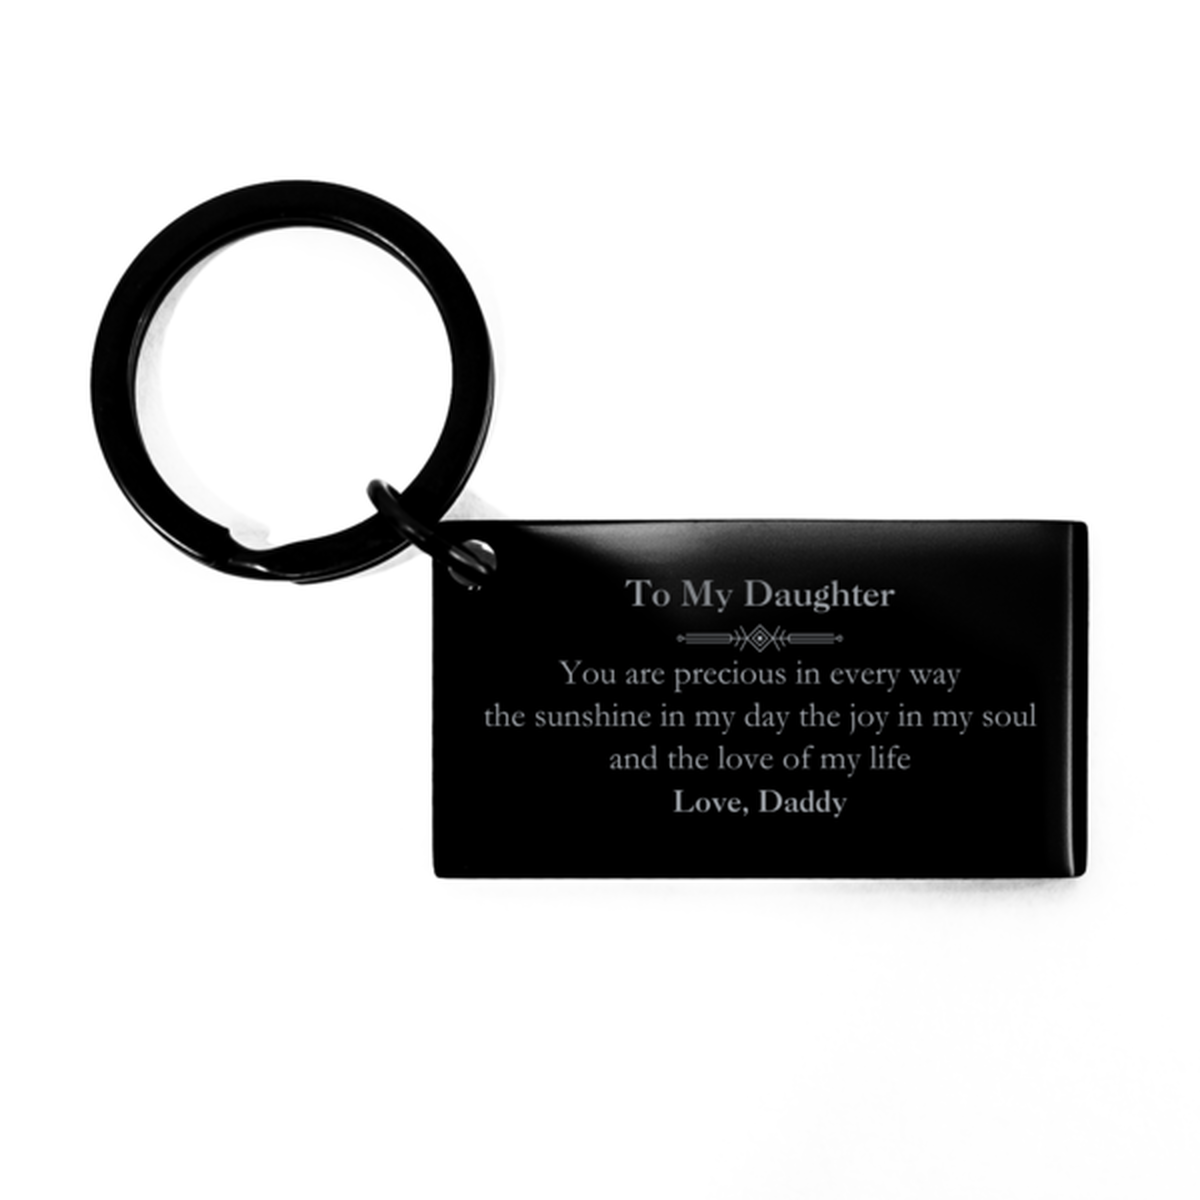 Graduation Gifts for Daughter Keychain Present from Daddy, Christmas Daughter Birthday Gifts Daughter You are precious in every way the sunshine in my day. Love, Daddy